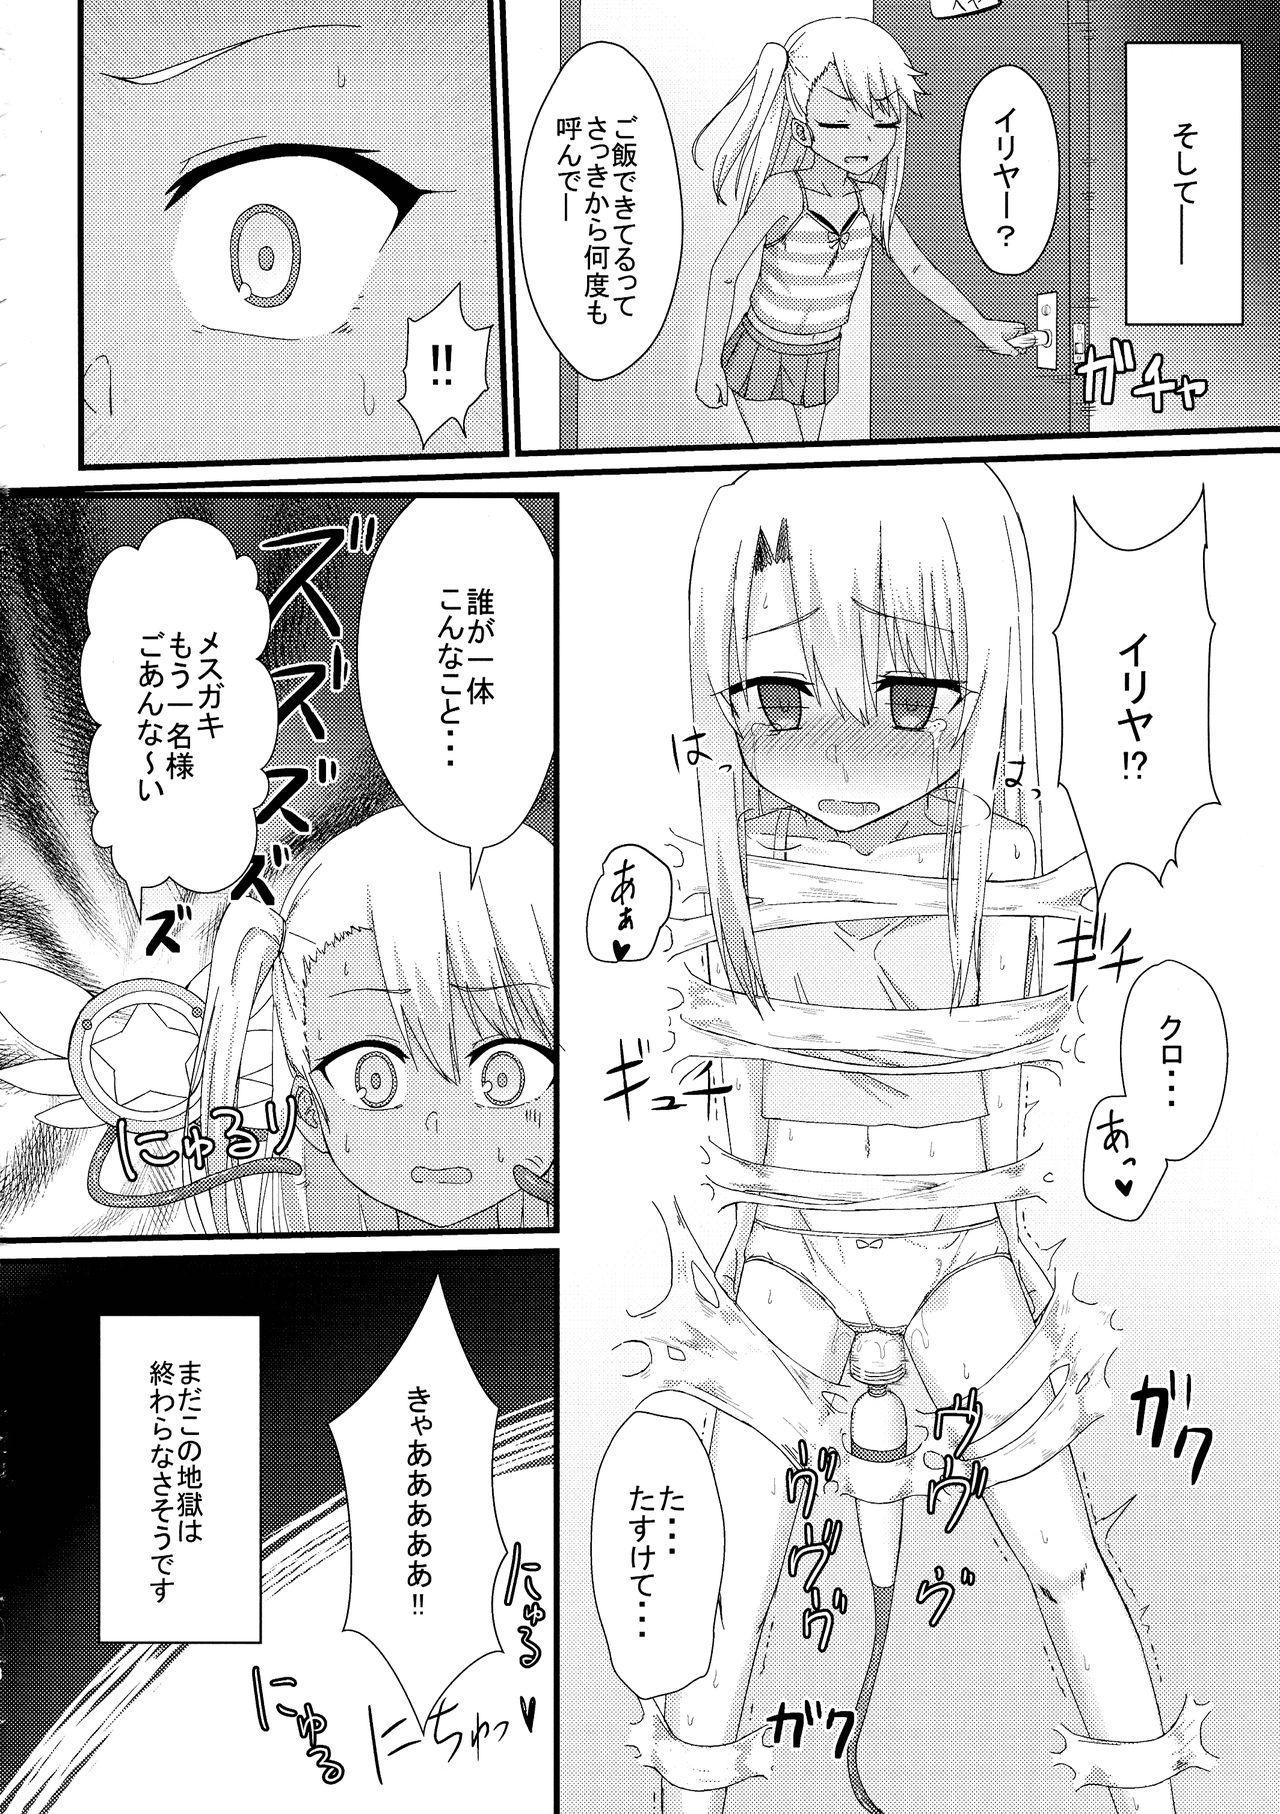 Adolescente Illya to Ruby Etchi Etchi Secret Function - Fate kaleid liner prisma illya Ass - Page 16